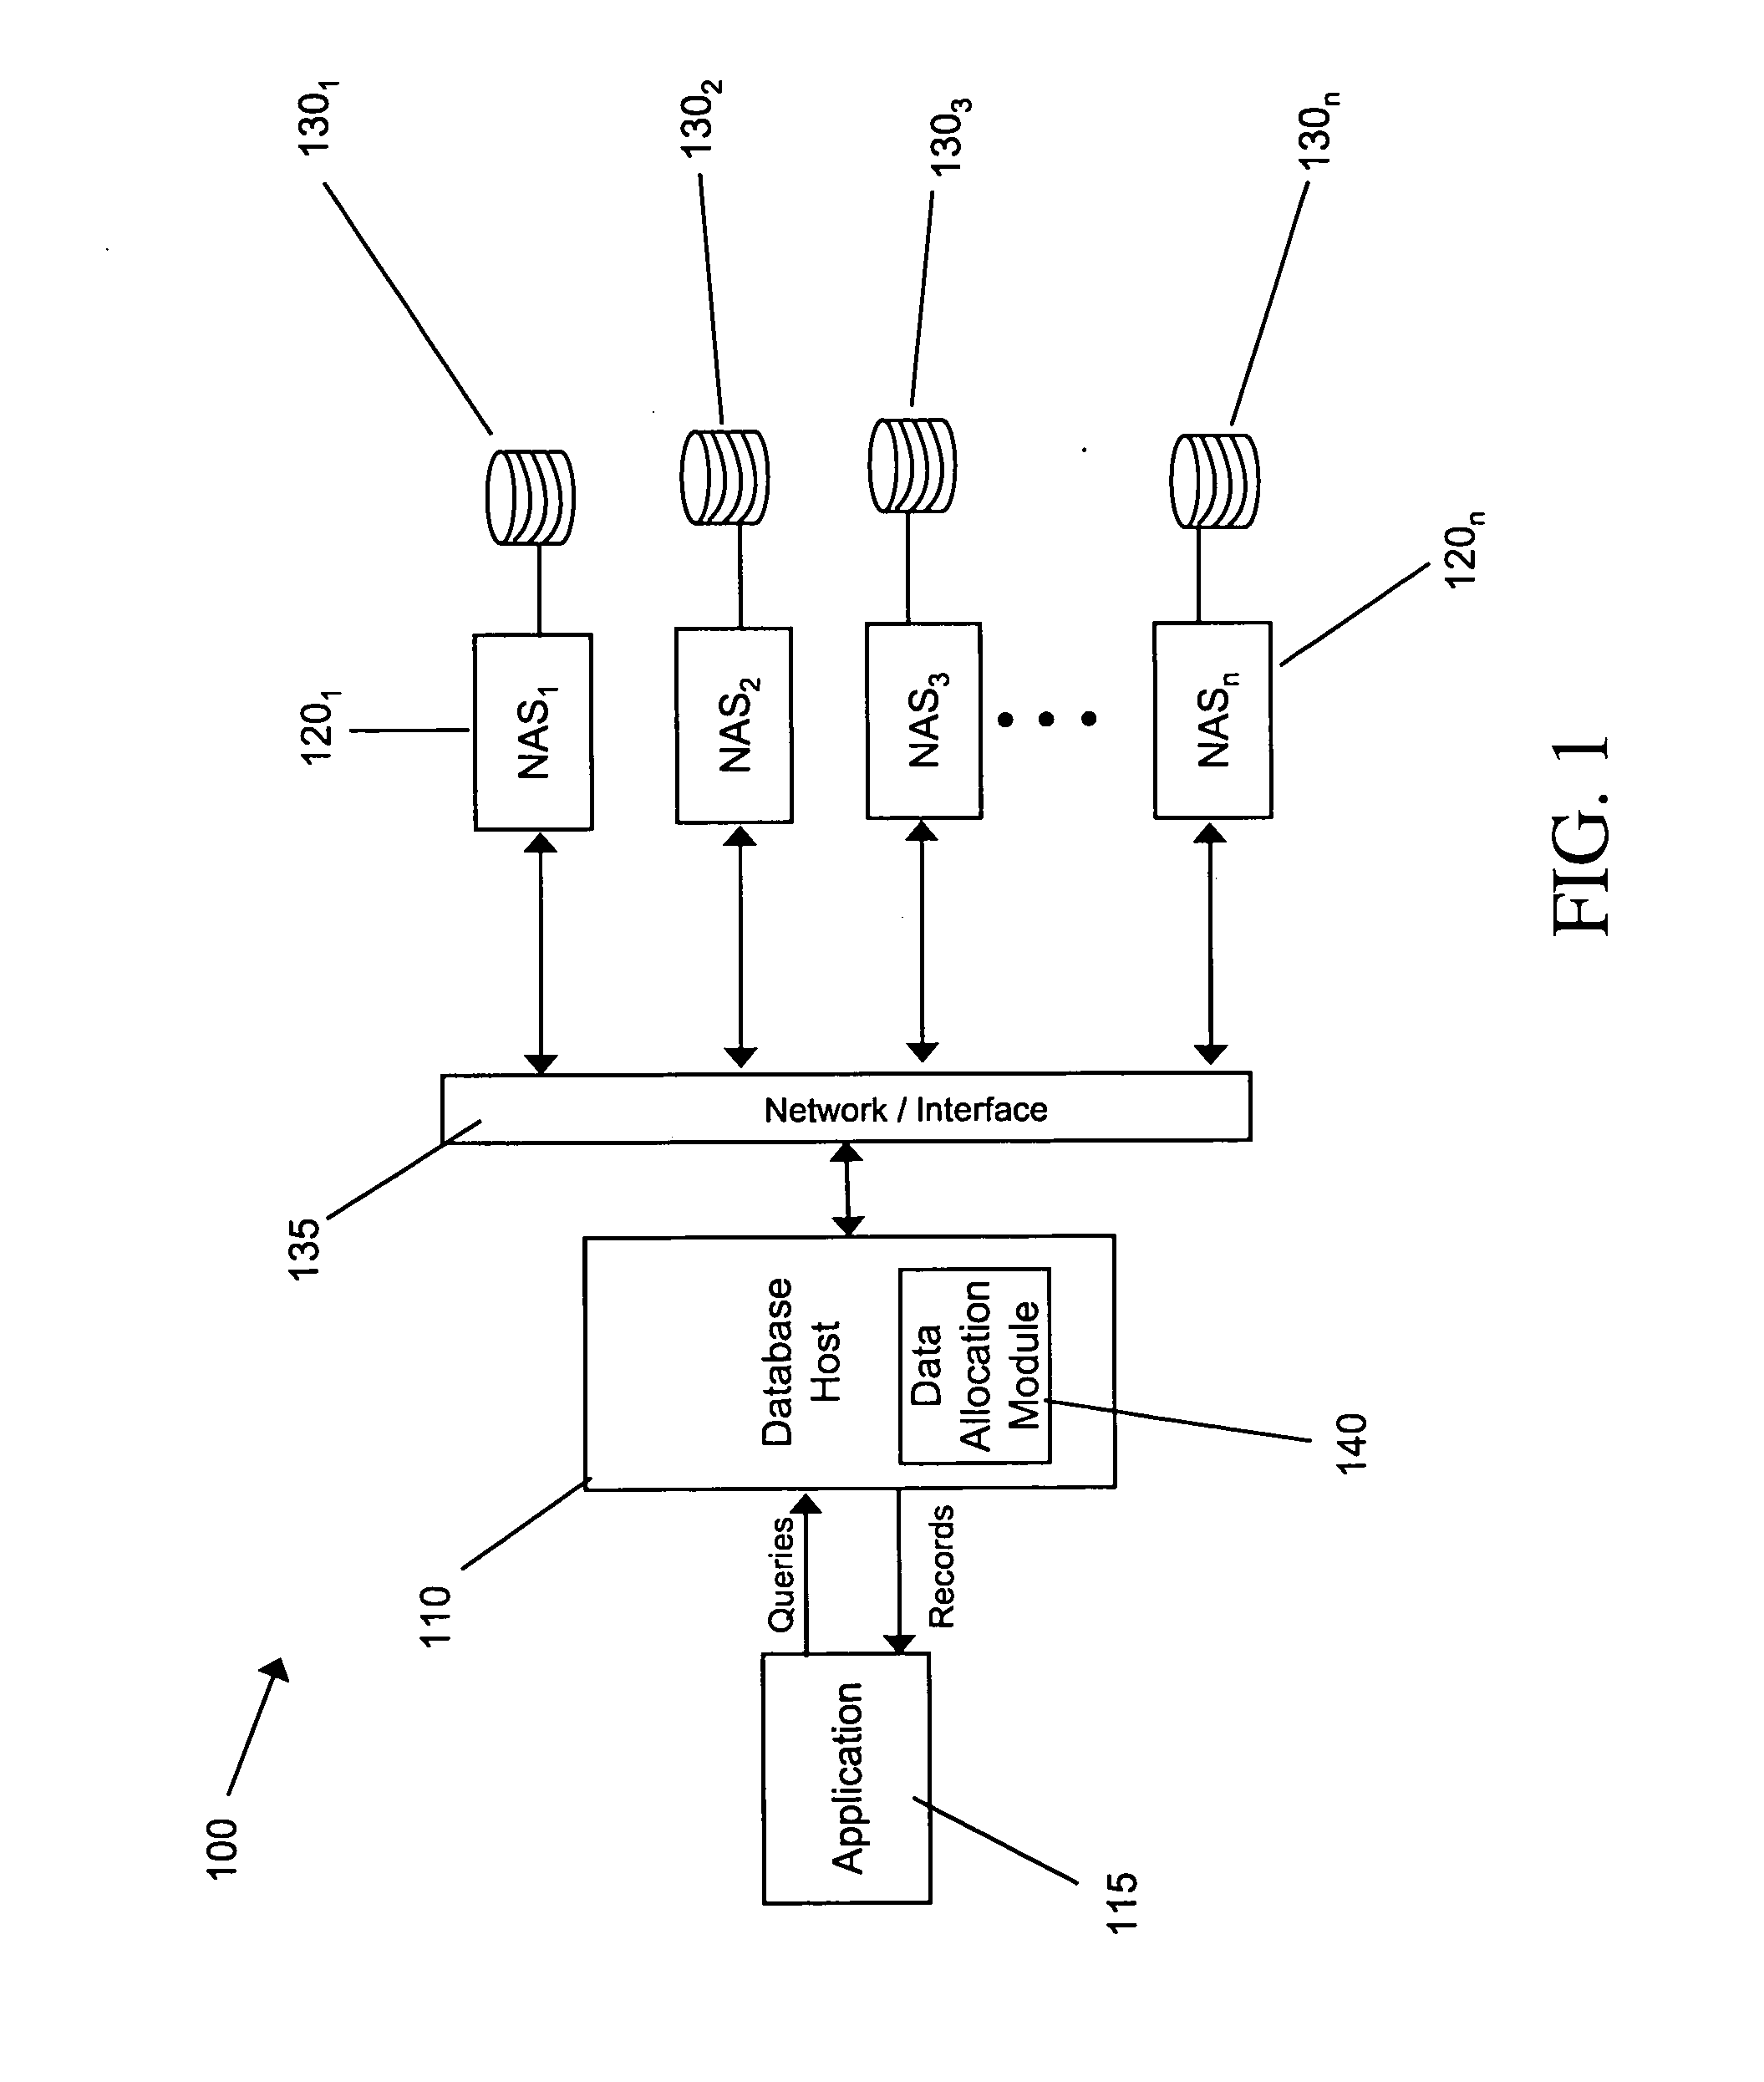 Allocation and redistribution of data among storage devices